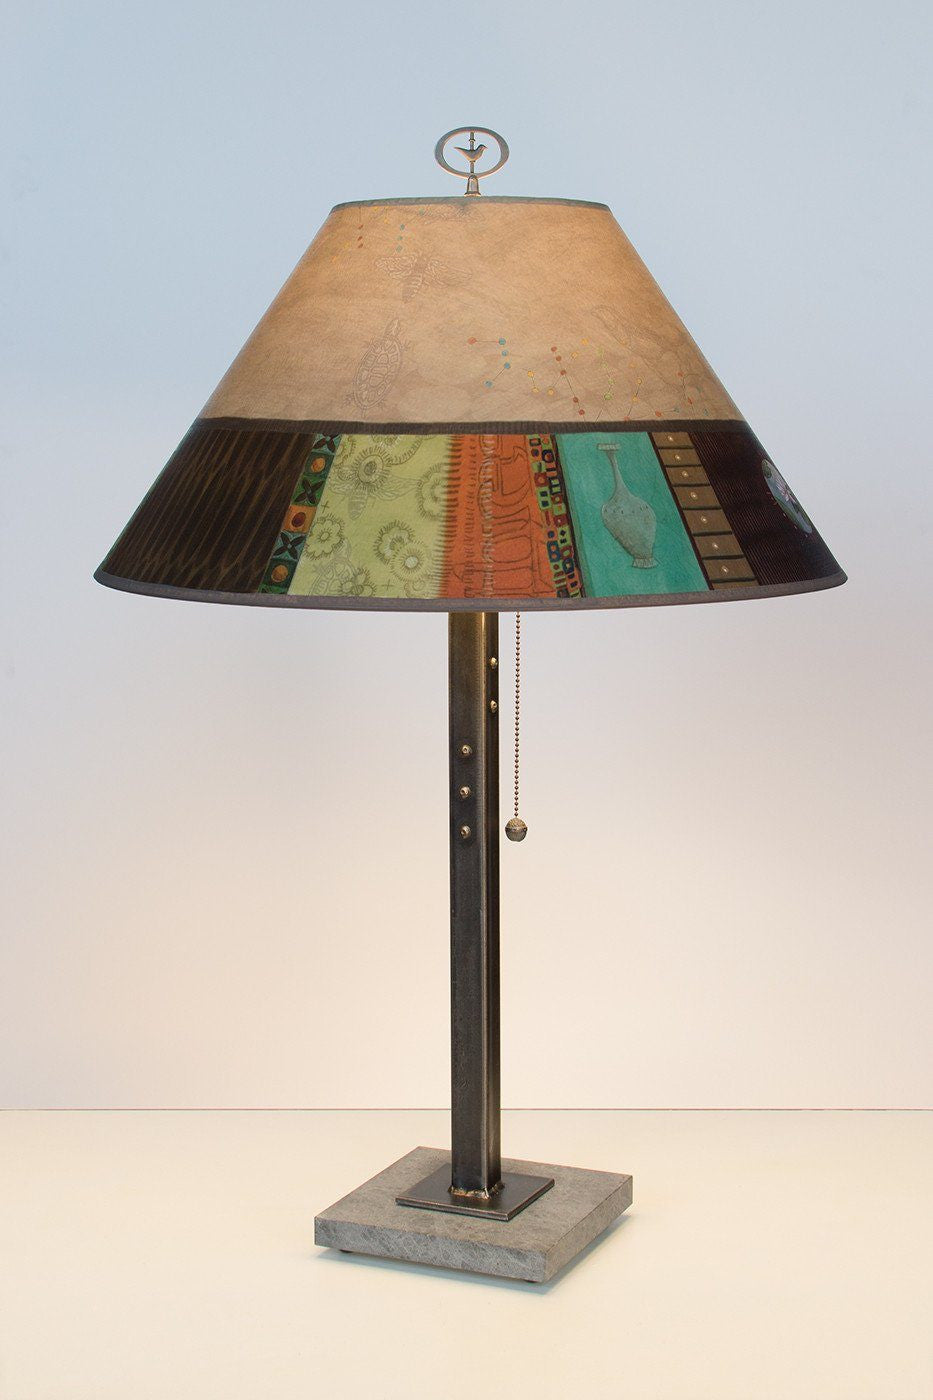 Steel Table Lamp on Italian Marble with Large Conical Shade in Linen Match